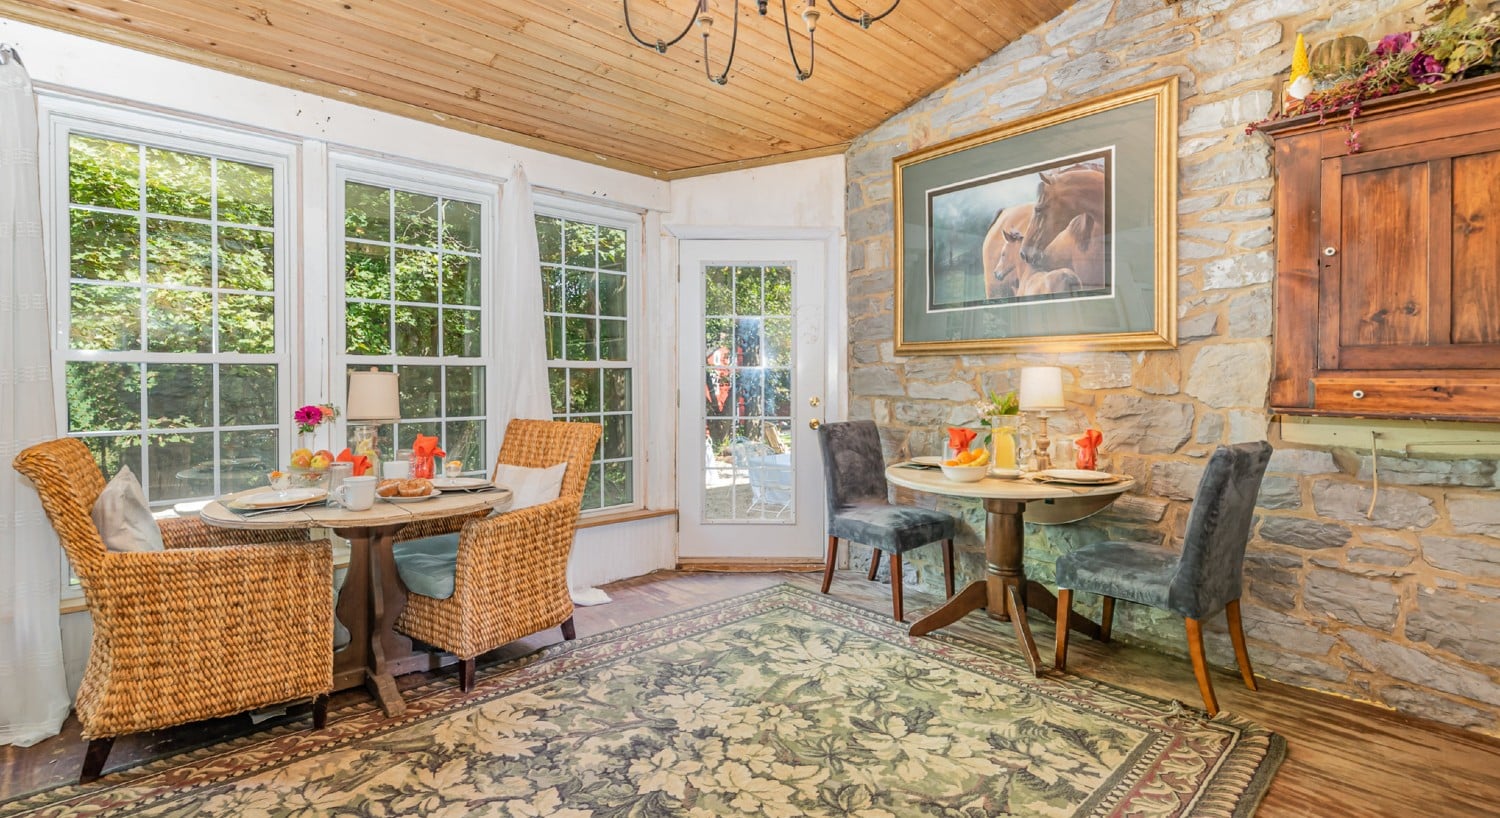 Cozy breakfast nook with two tables for two by a stone wall and wall of windows on the other side